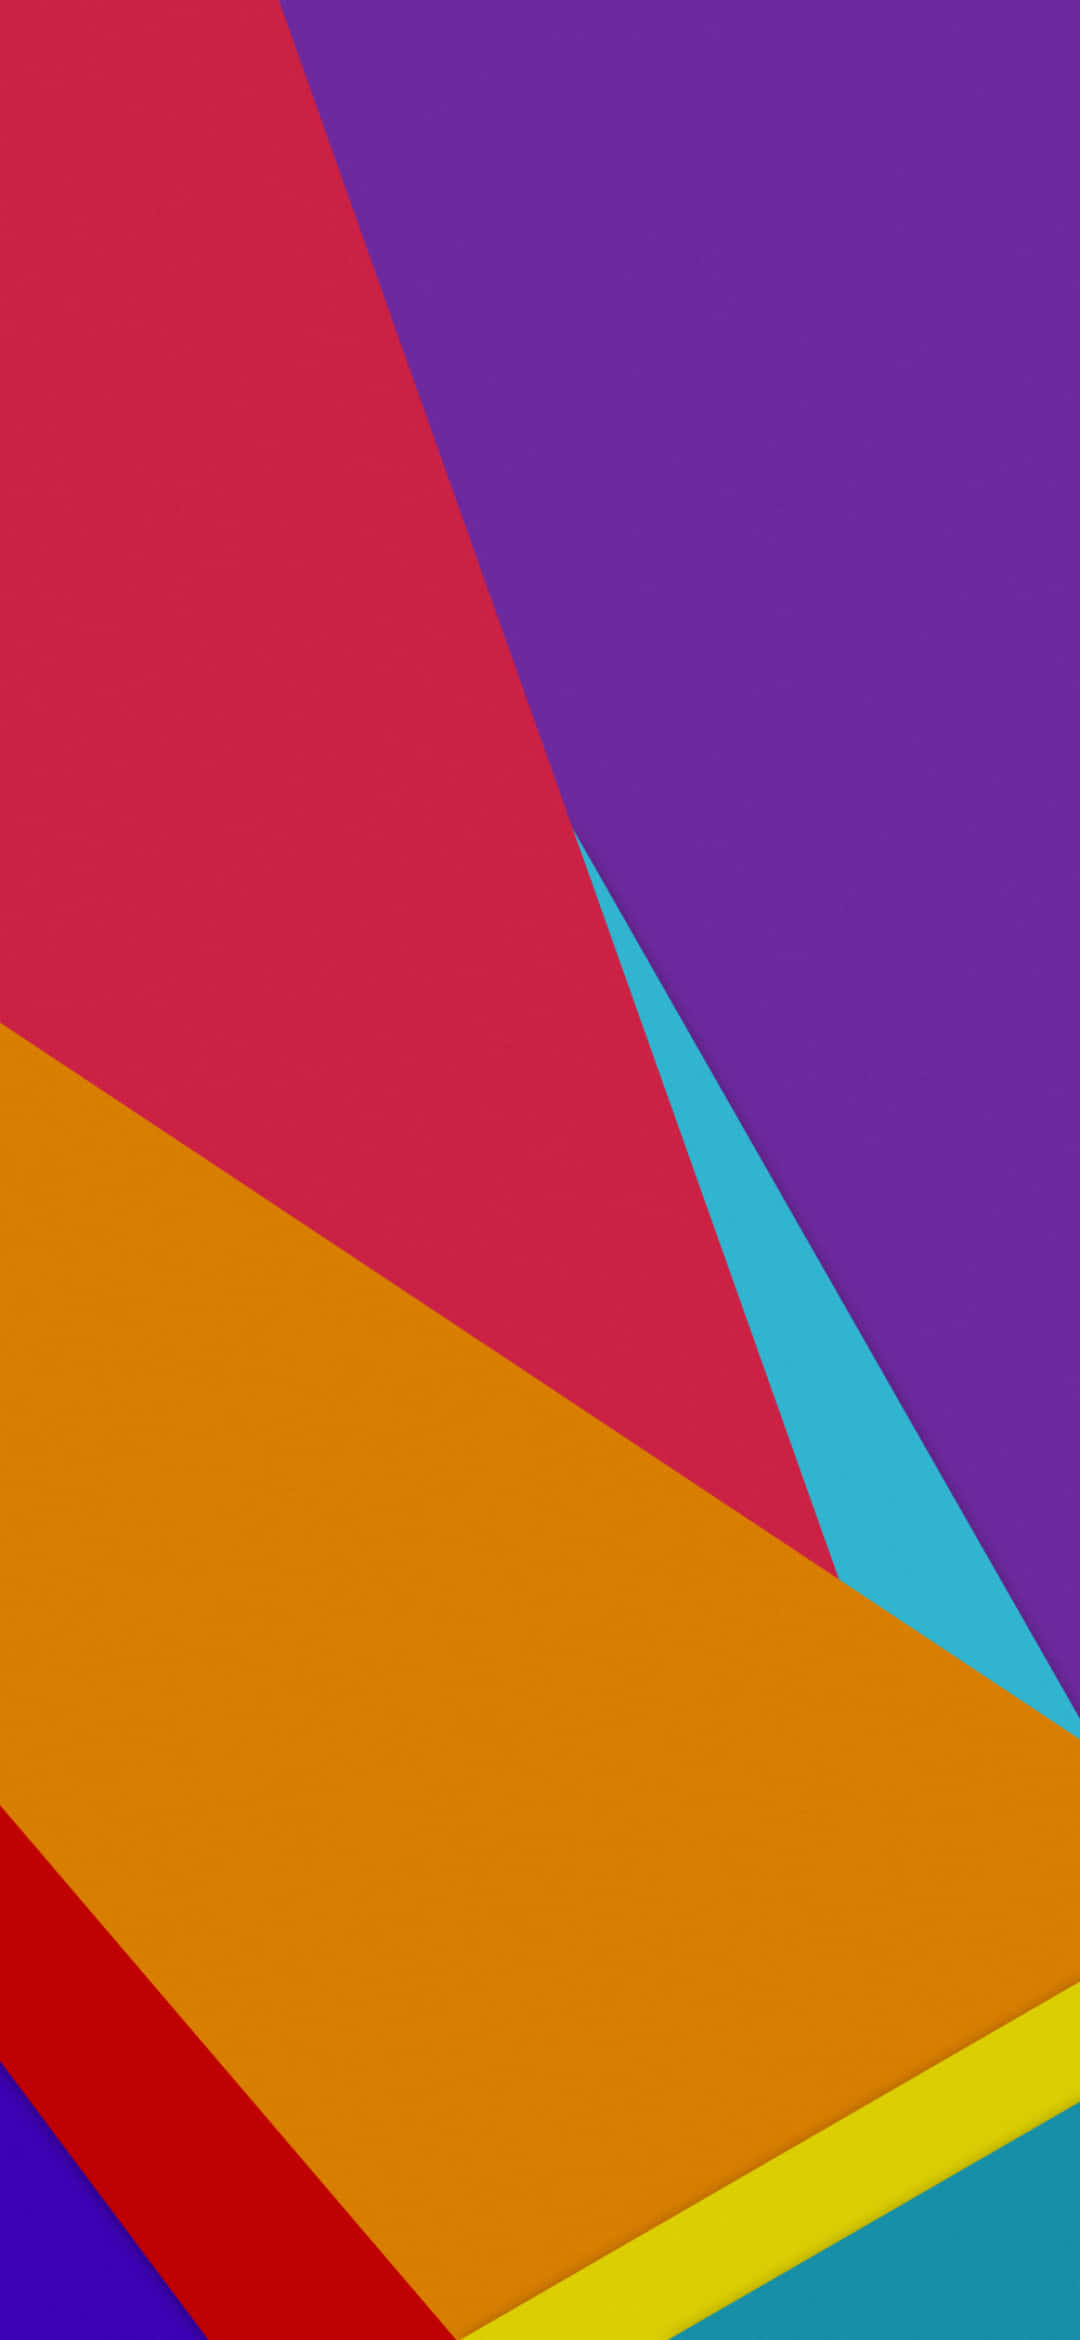 A Colorful Abstract Background With Triangles